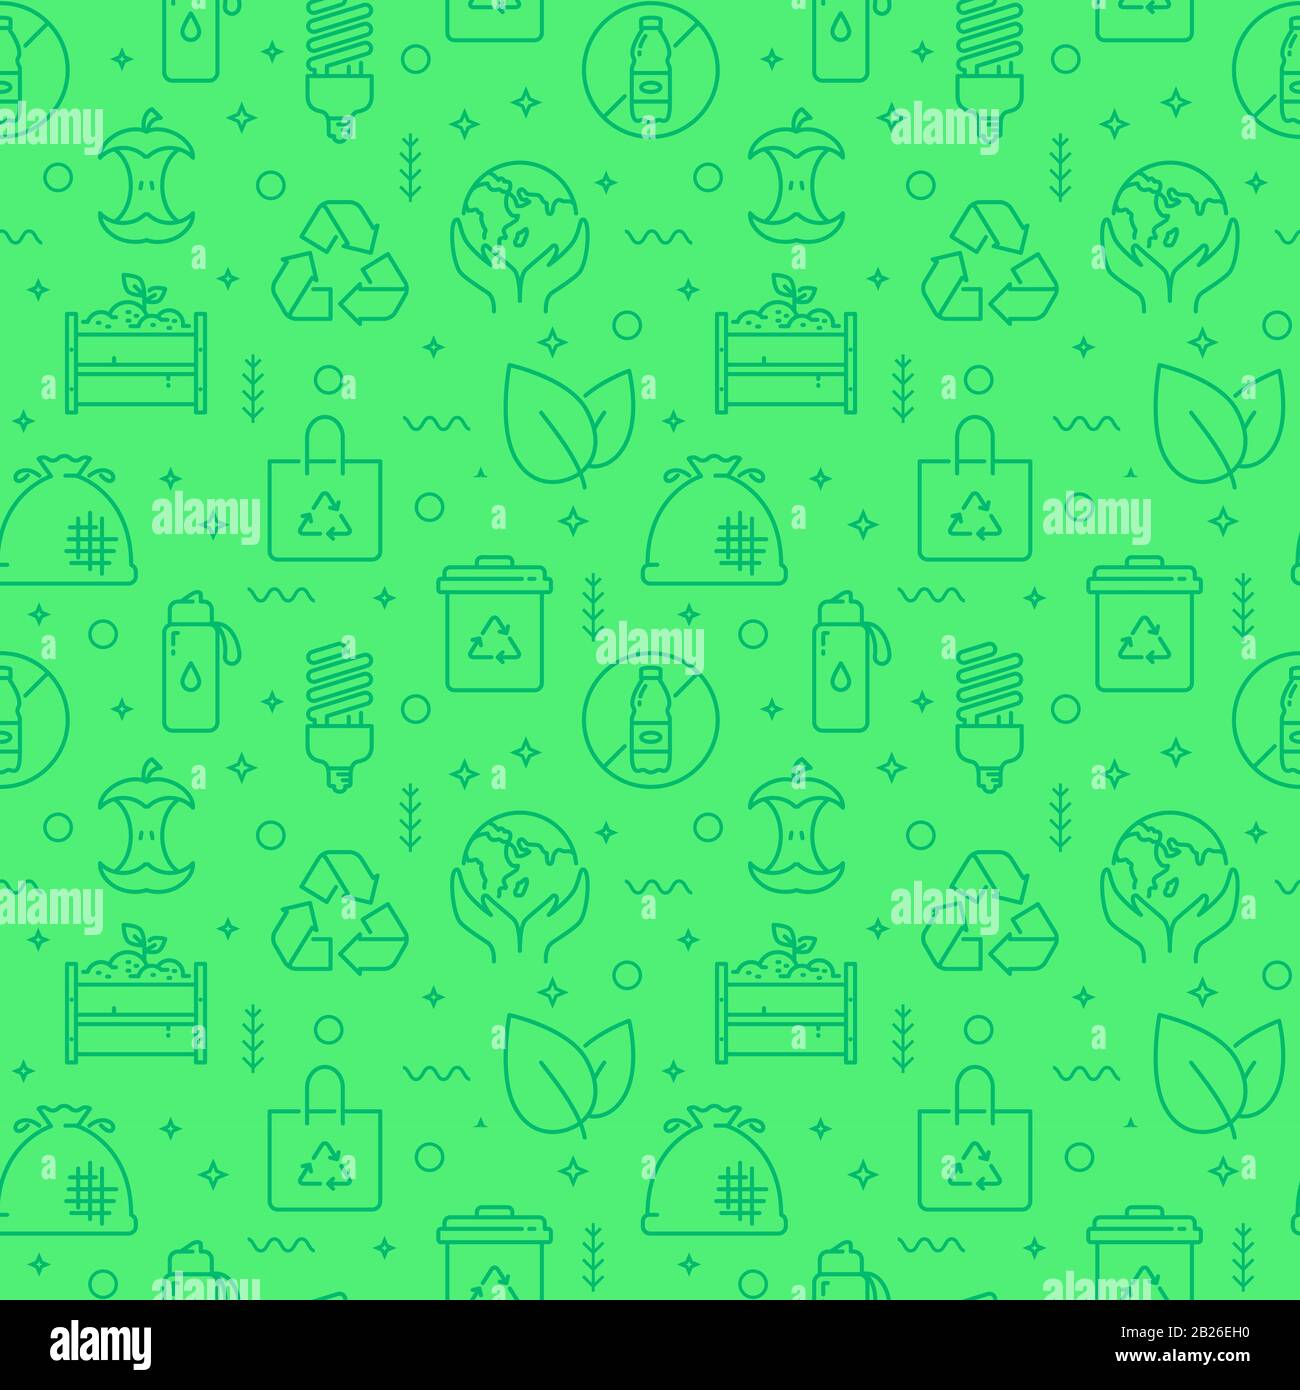 Zero waste seamless pattern with line icons. Monochrome green background. Waste recycling, reusable items, eco lifestyle, caring for the environment. Stock Vector